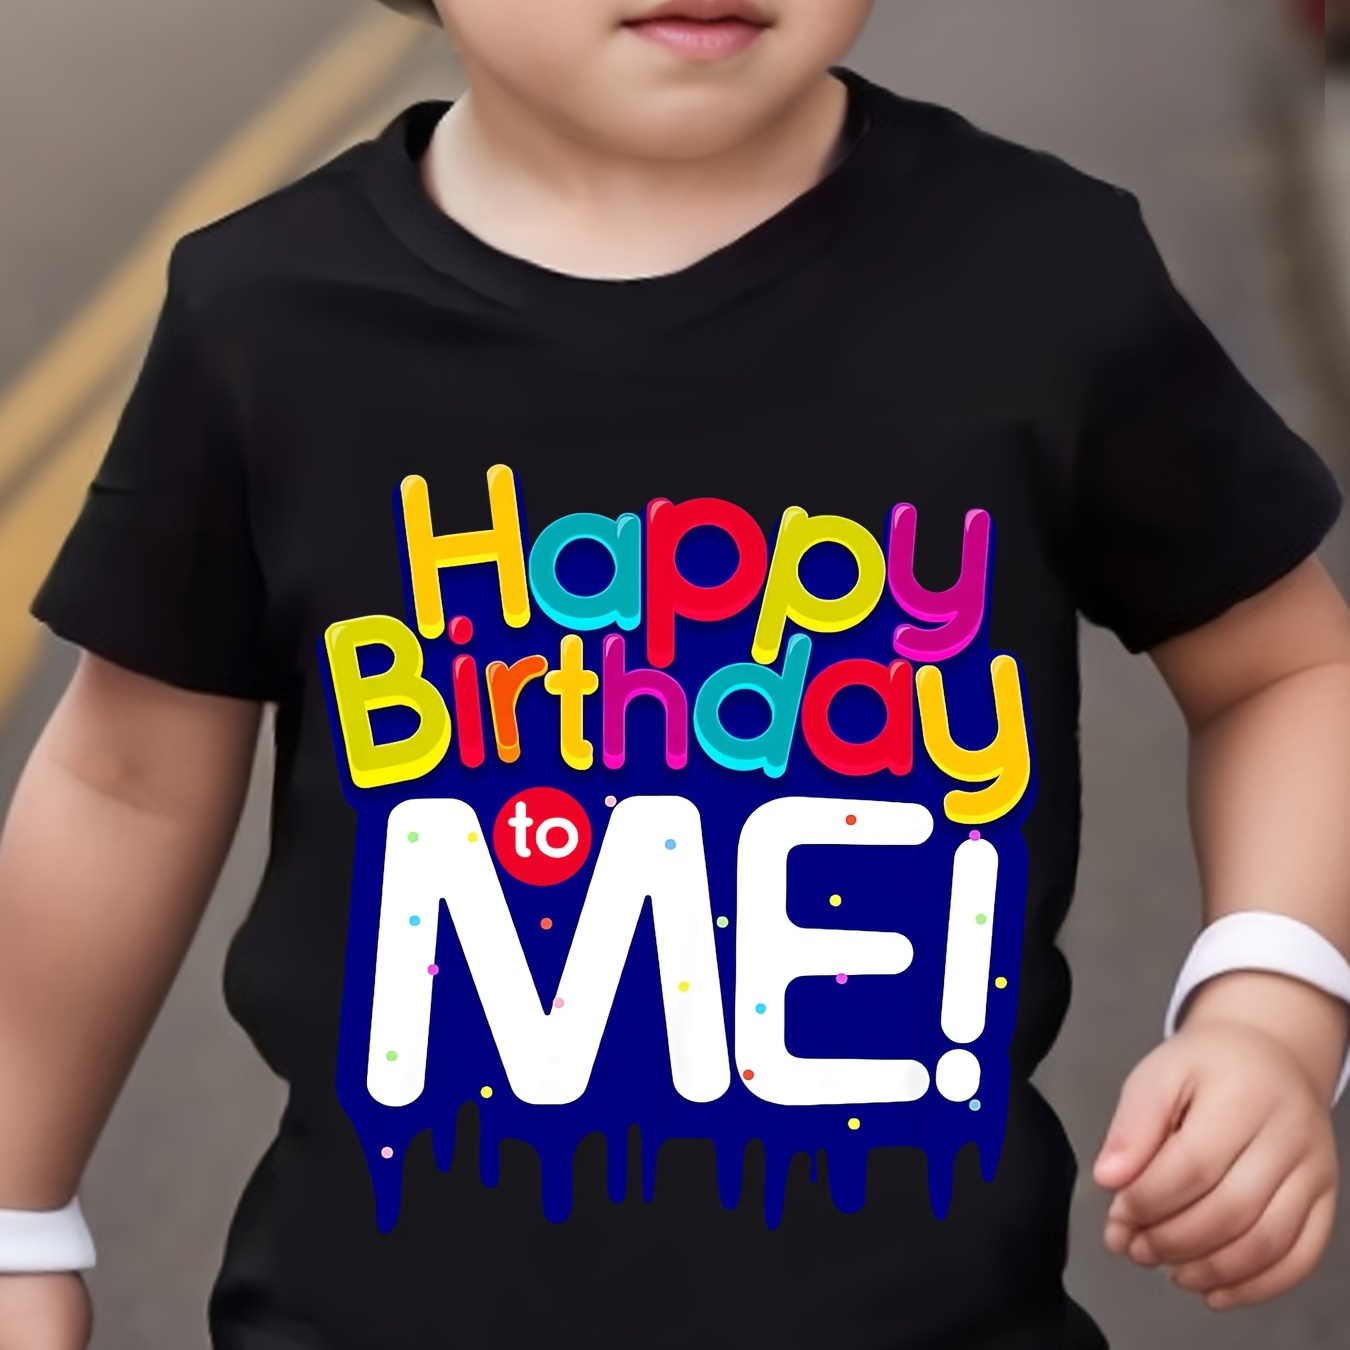 

Happy Birthday To Me Print Short Sleeve T-shirt For Boys, Casual Round Neck Comfy Summer Outdoor Clothes